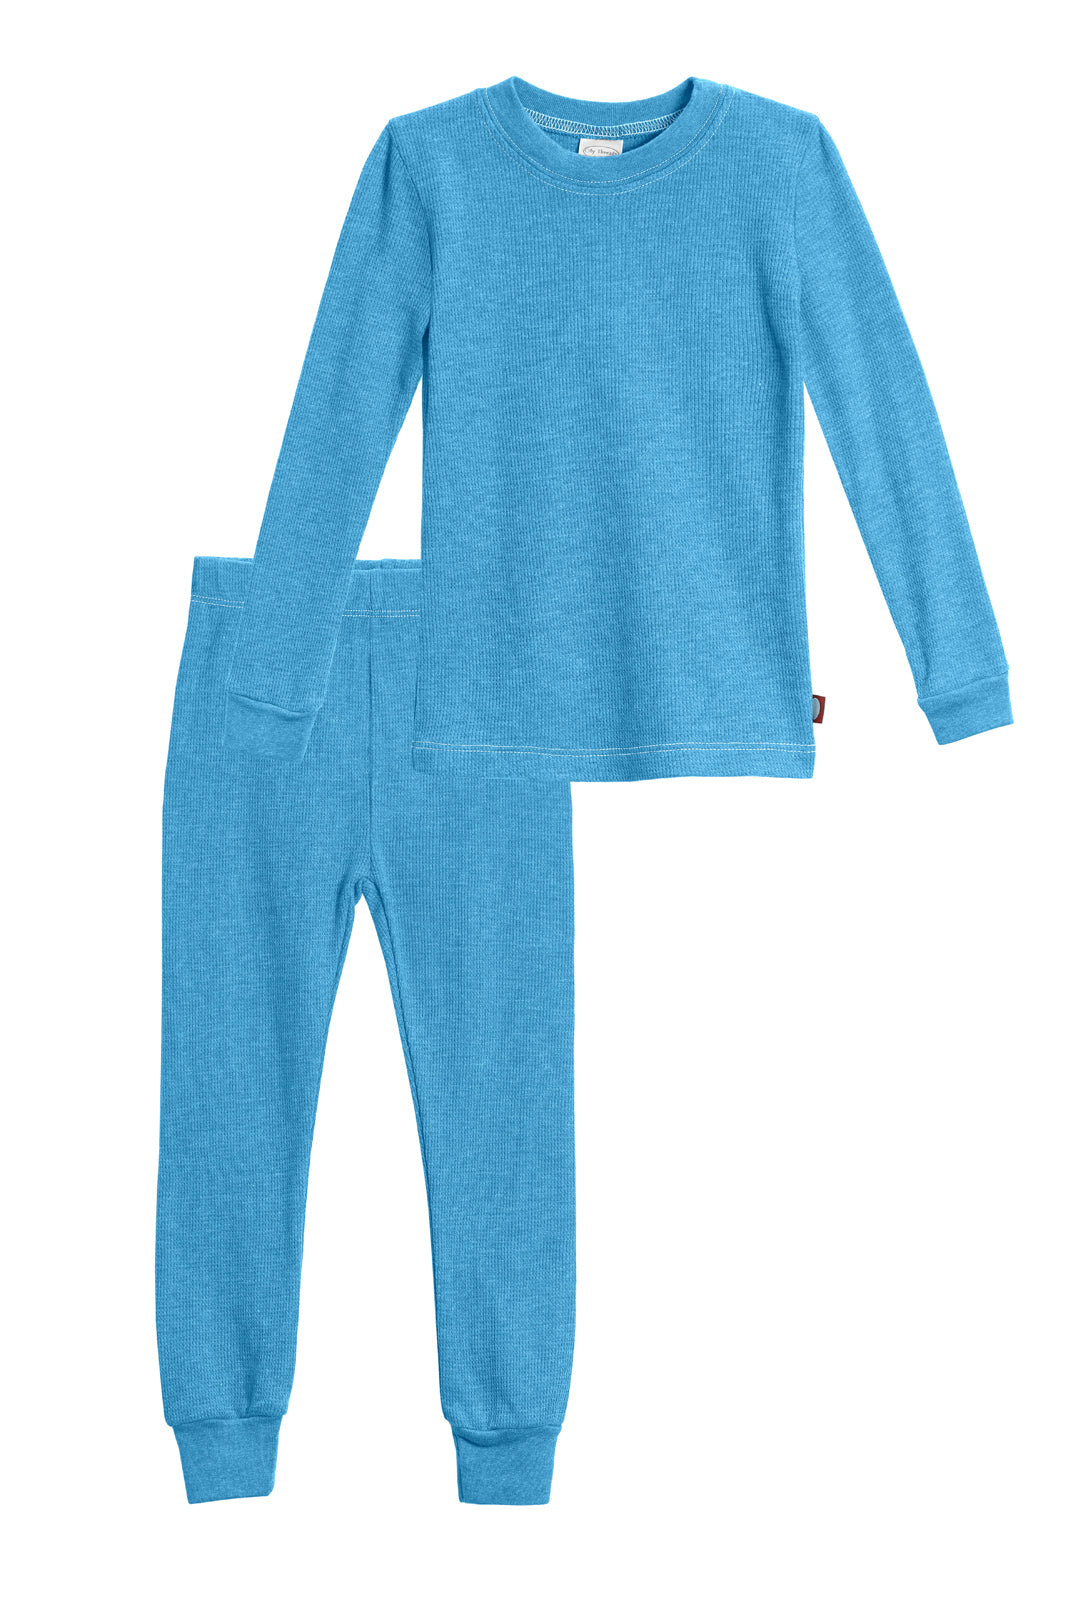 City Threads Boys Thermal Underwear Set Long John, Soft Breathable Cotton  Base Layer - Made in USA